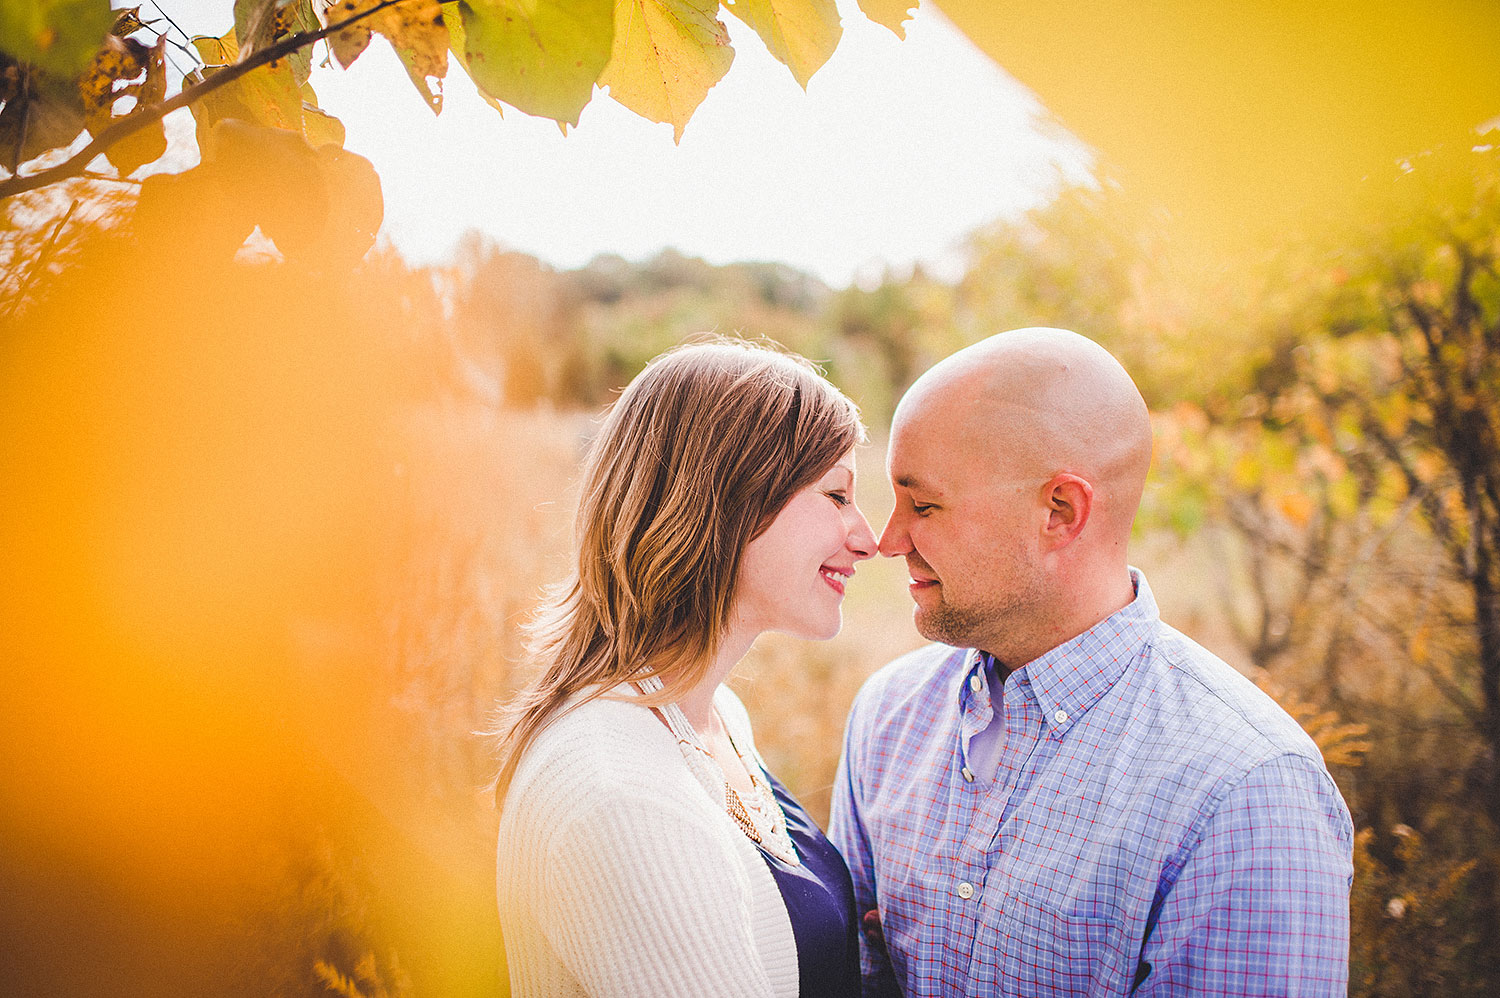 pat-robinson-photography-wilmington-engagement-session-7-2.jpg